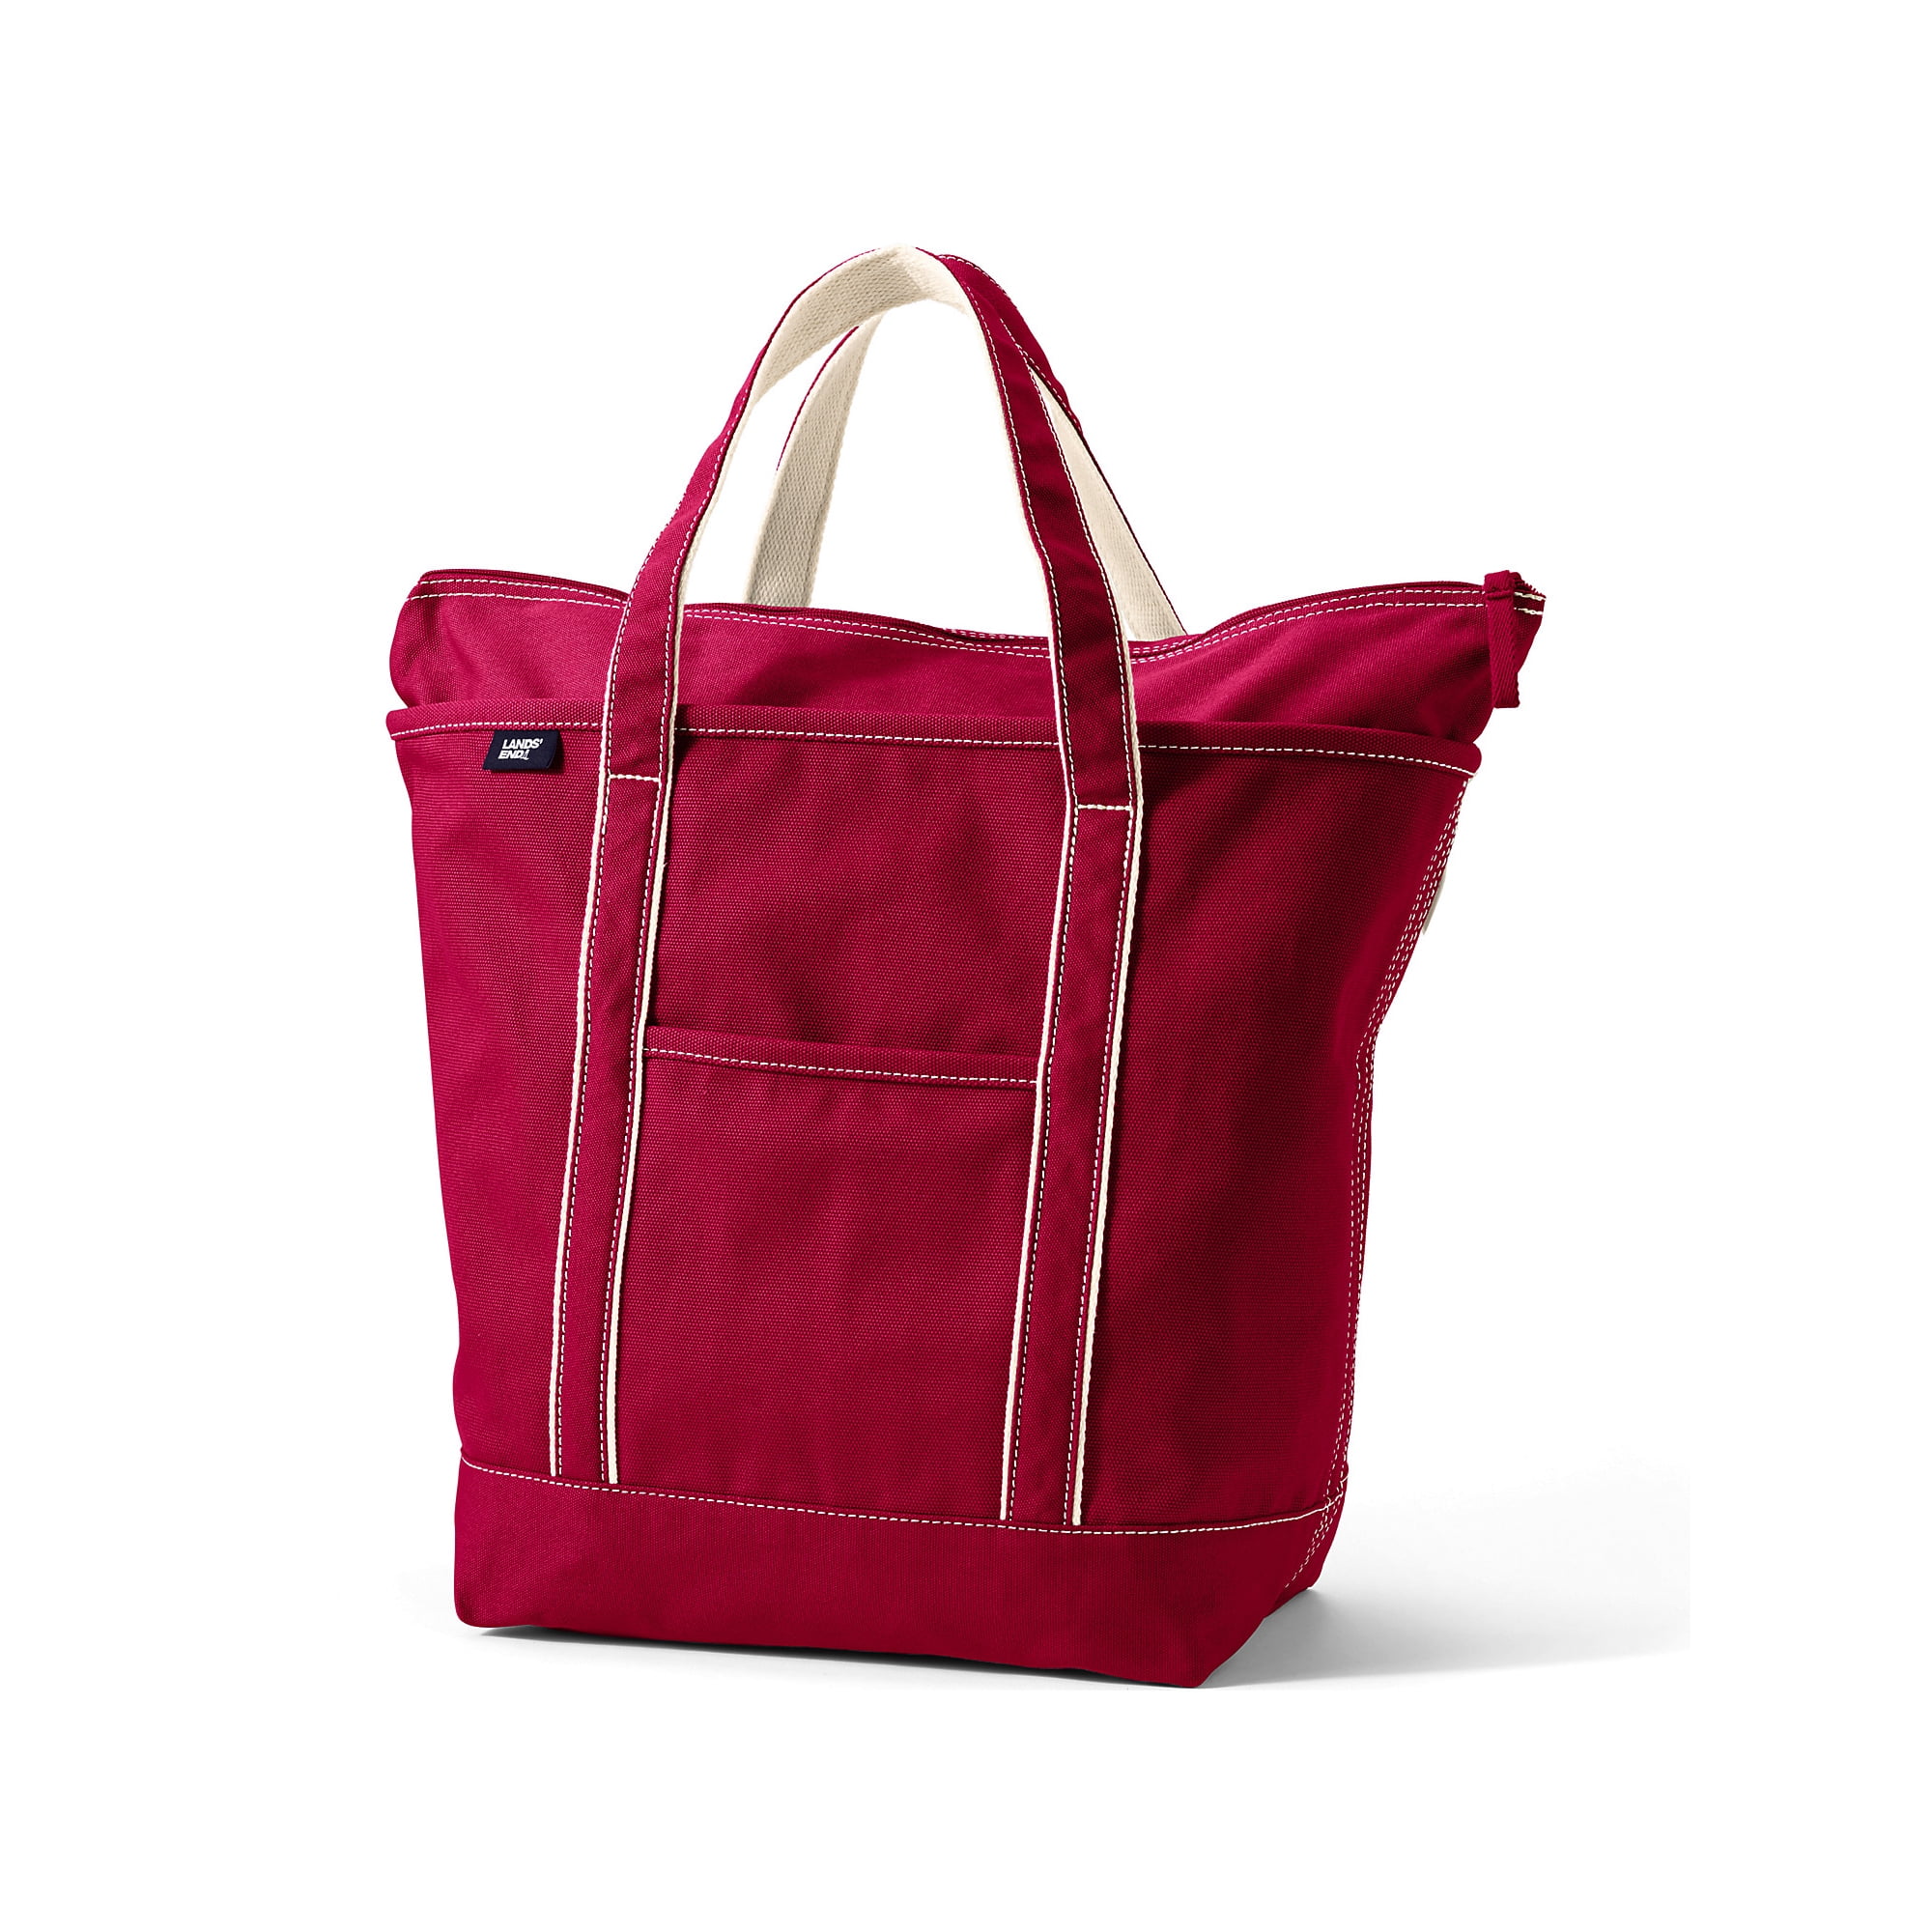 Large Solid Color Zip Top Canvas Tote Bag - Lands' End - Red